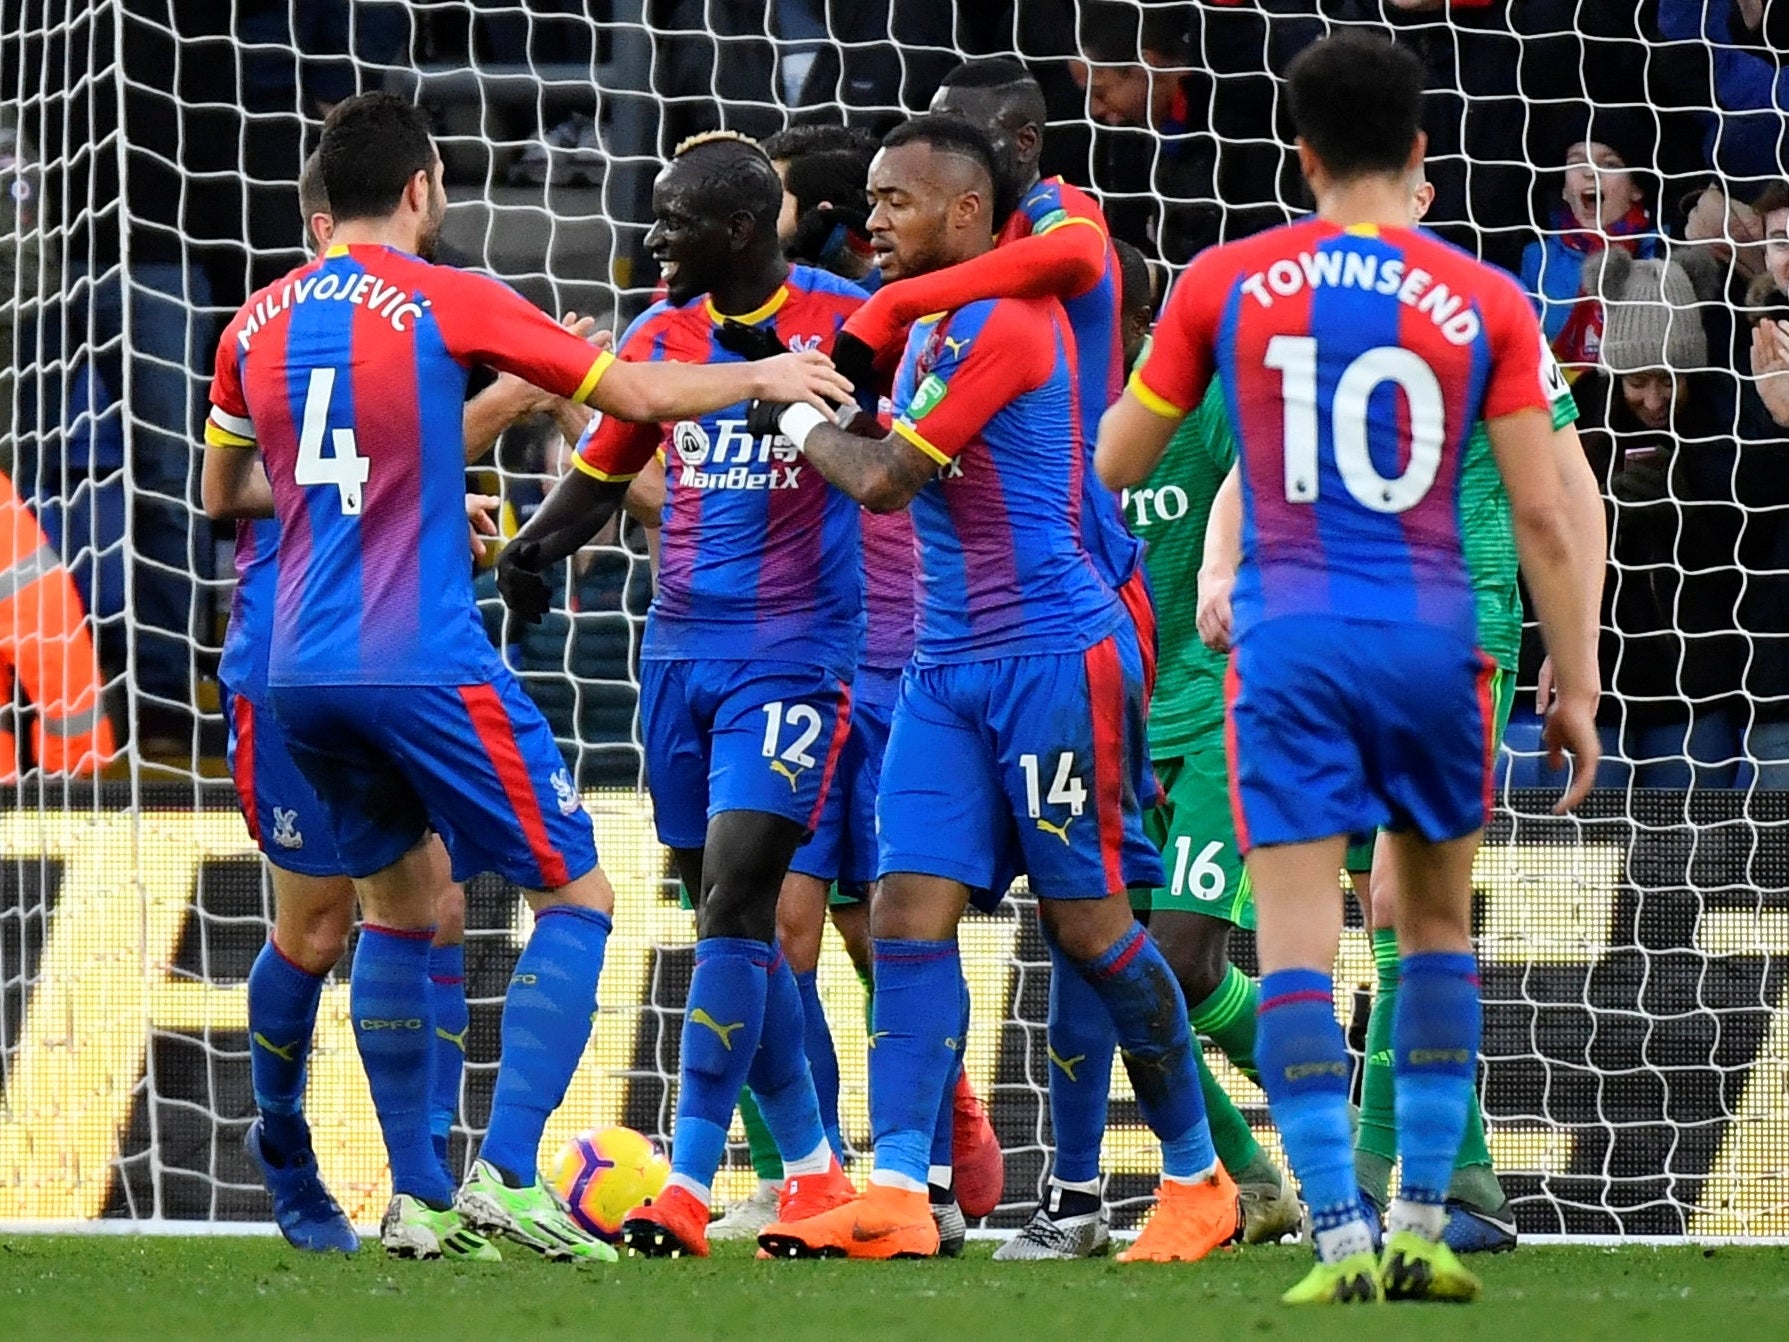 Palace opened the scoring with a scrappy goal